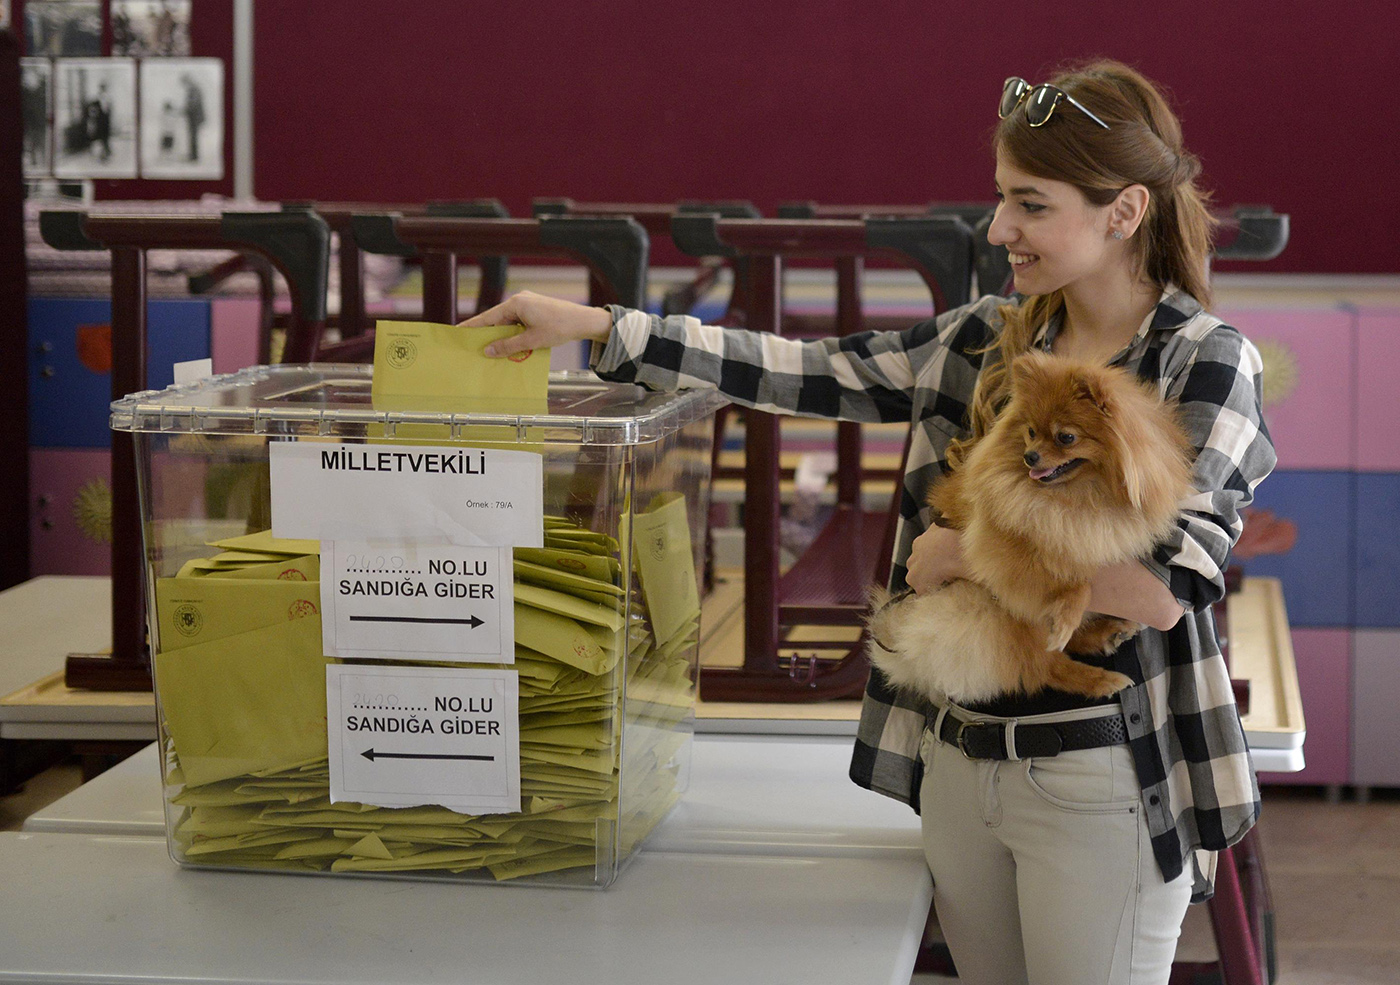 A woman casts her vote at a polling station in Istanbul, Turkey on 07 June 2015.